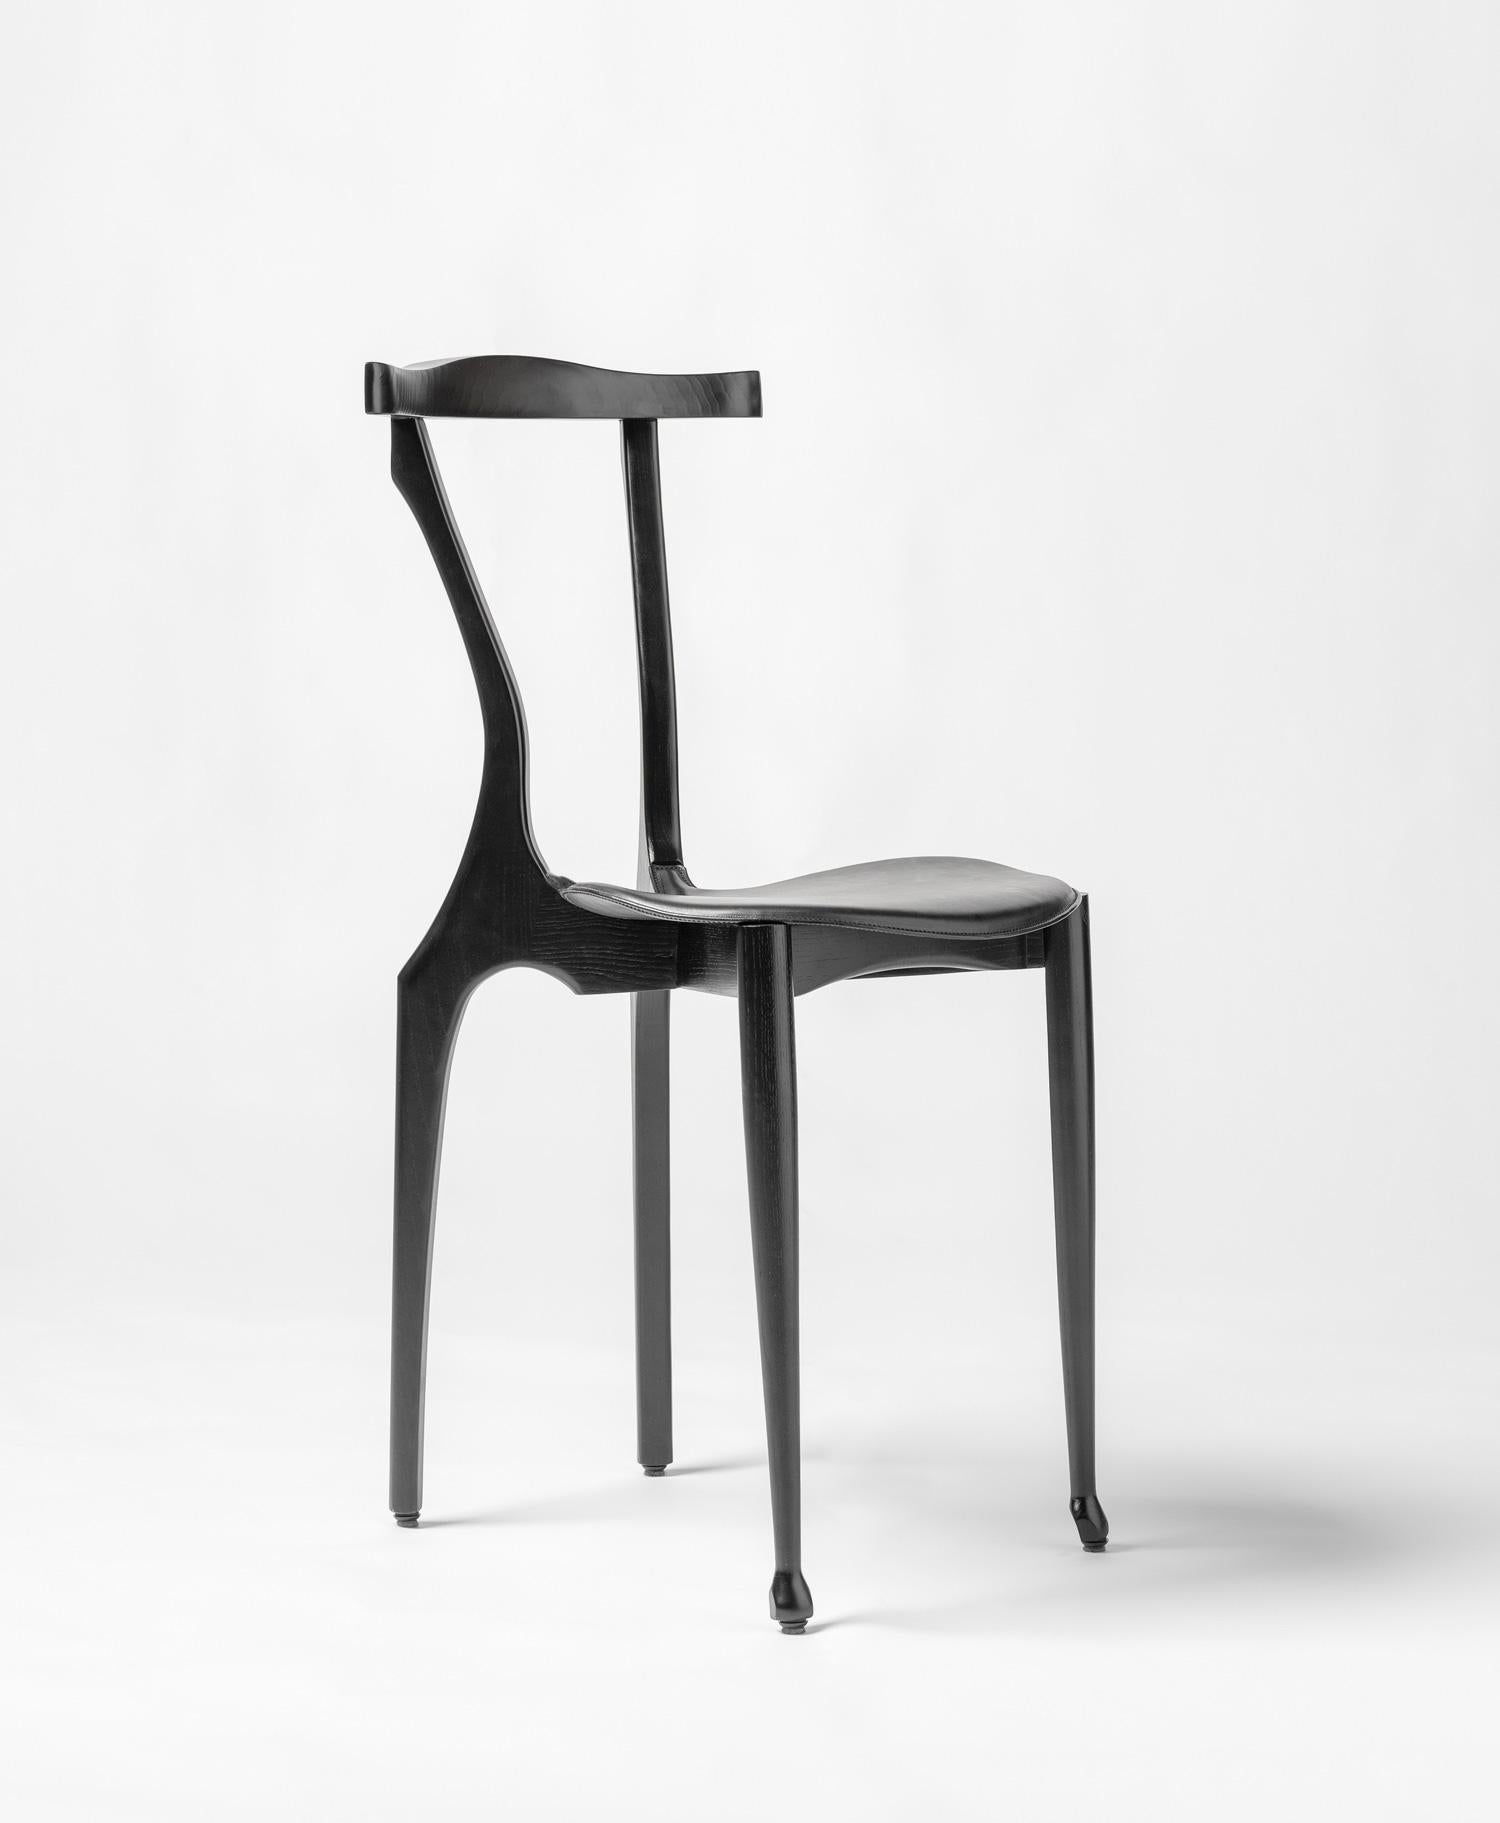 Spanish Gaulinetta dining chair by Oscar Tusquets red Lacquered Ash wood, contemporary  For Sale